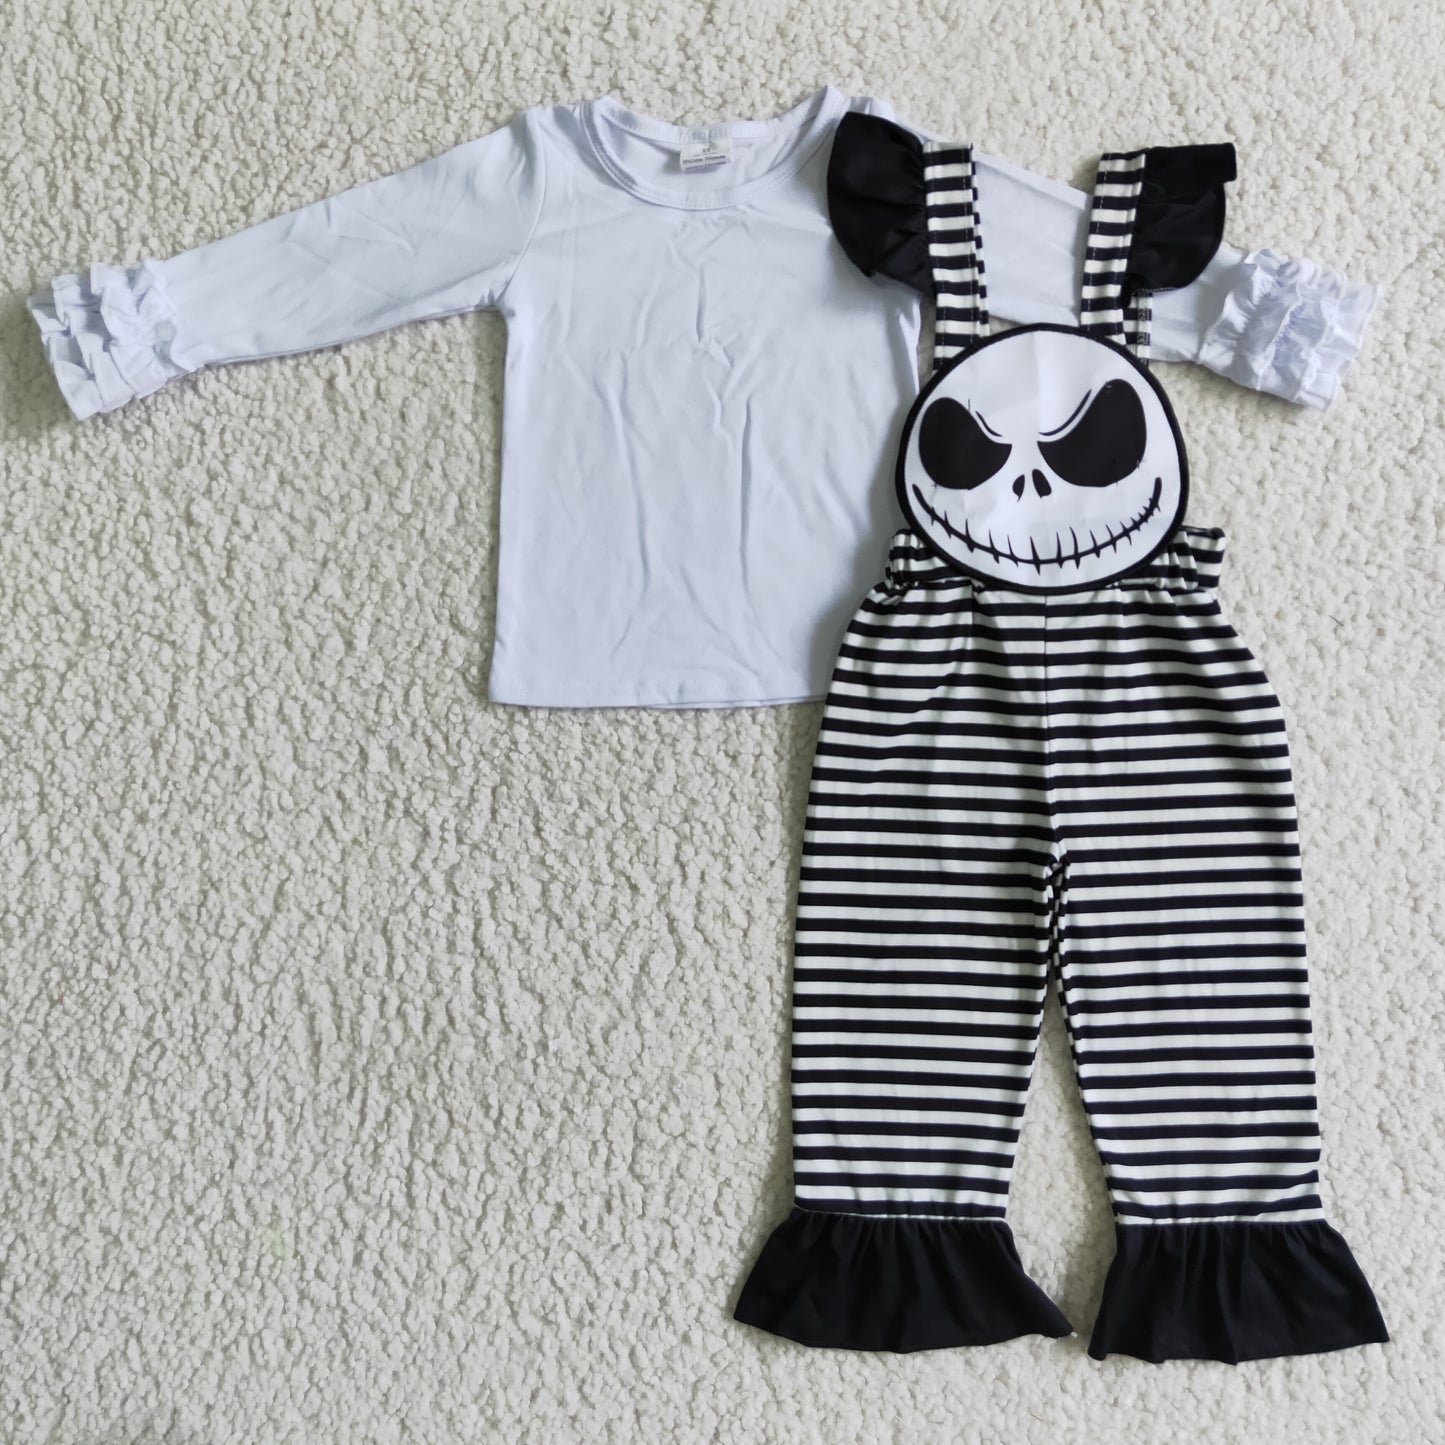 Baby girls long sleeve white top Halloween suspender pants outfit